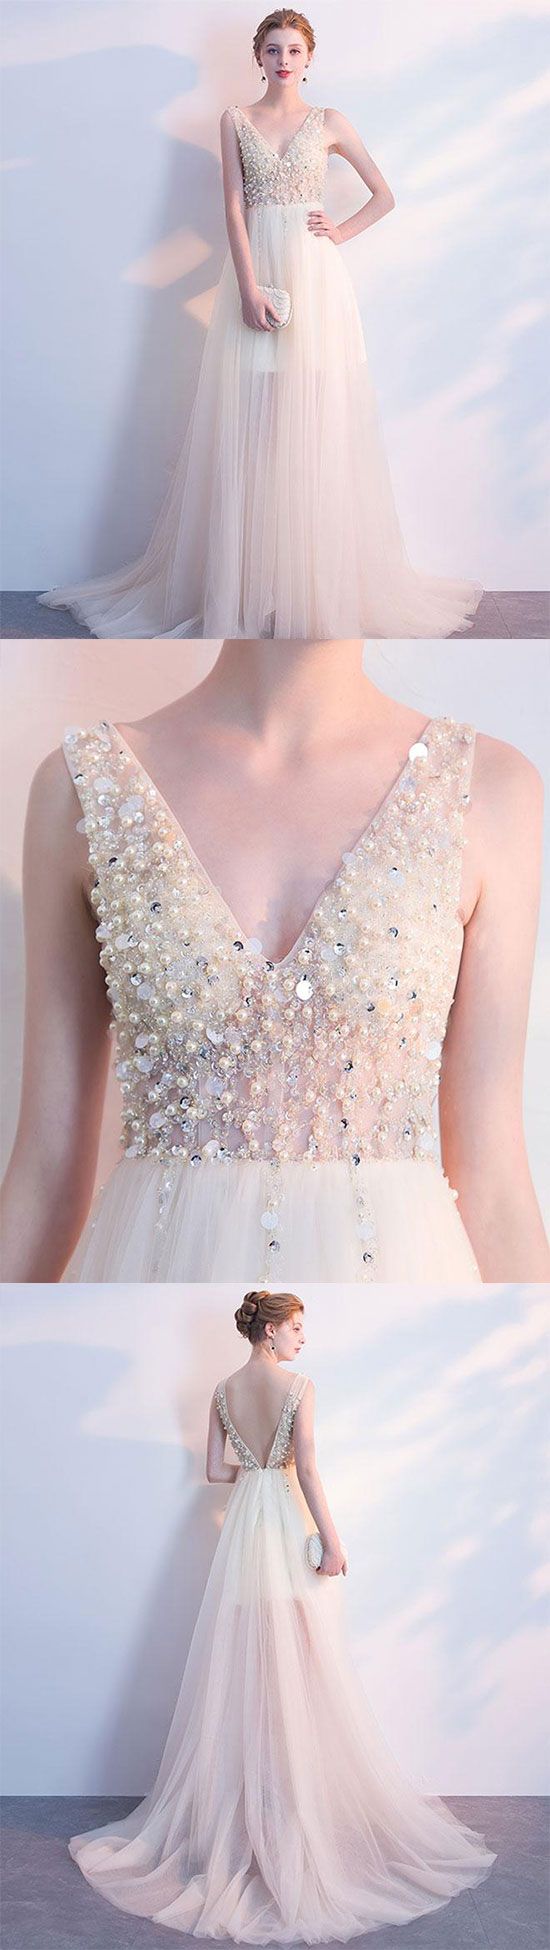 Custom Made V-neckline Pearl And Sequin Beaded Tulle Formal Long Evening Dress, Prom Dresses, Wedding Gowns